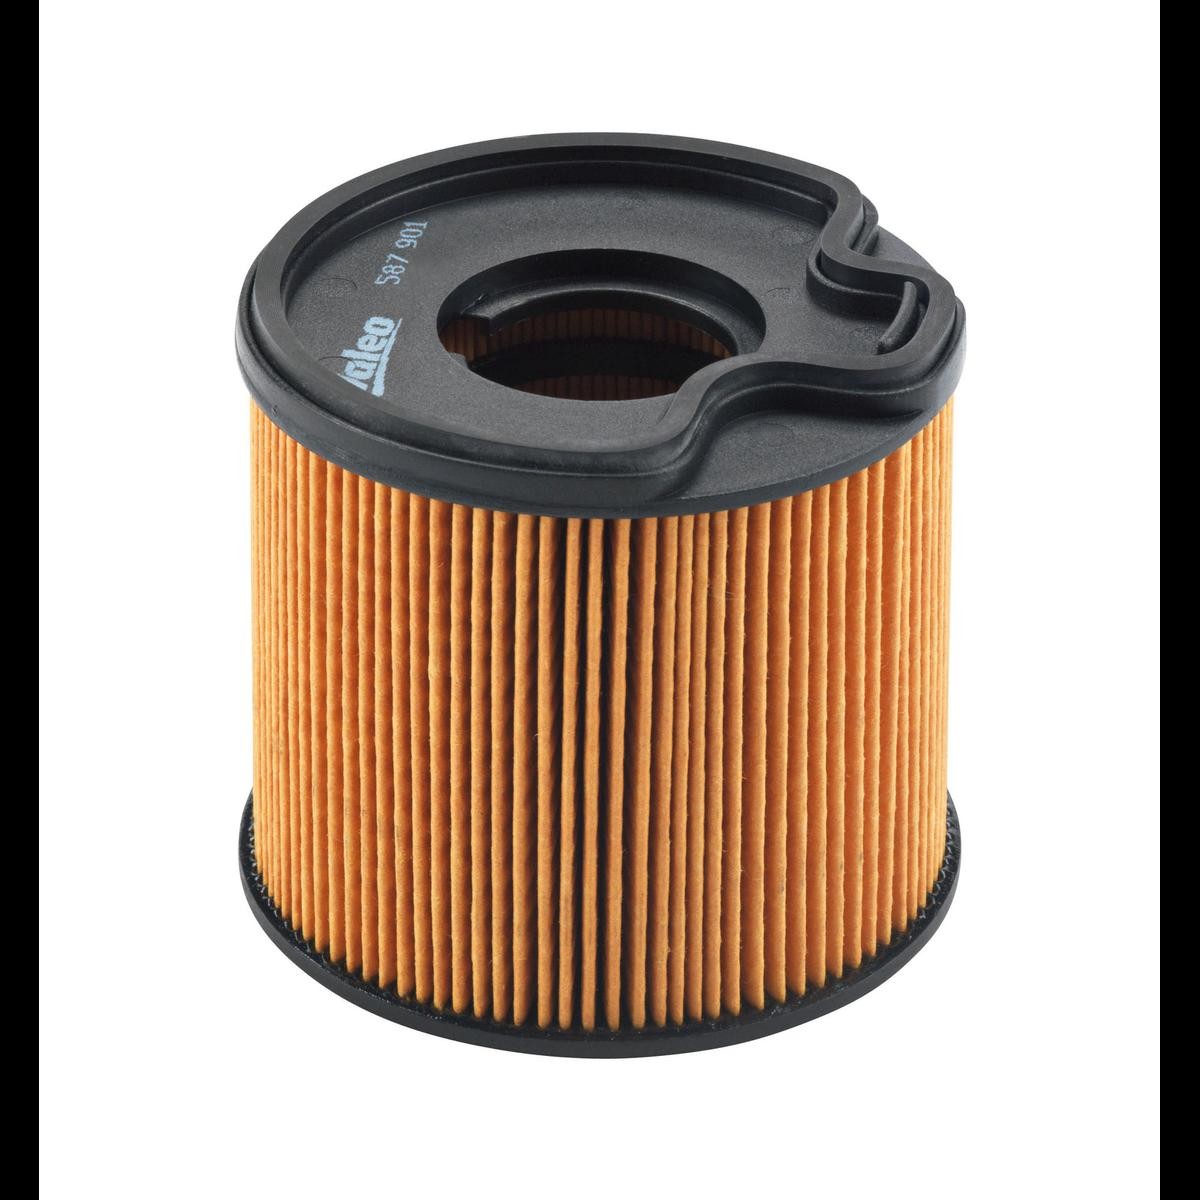 VALEO 587901 Fuel filter PEUGEOT 406 Coupe 2.2 HDI 133 hp Diesel 2004